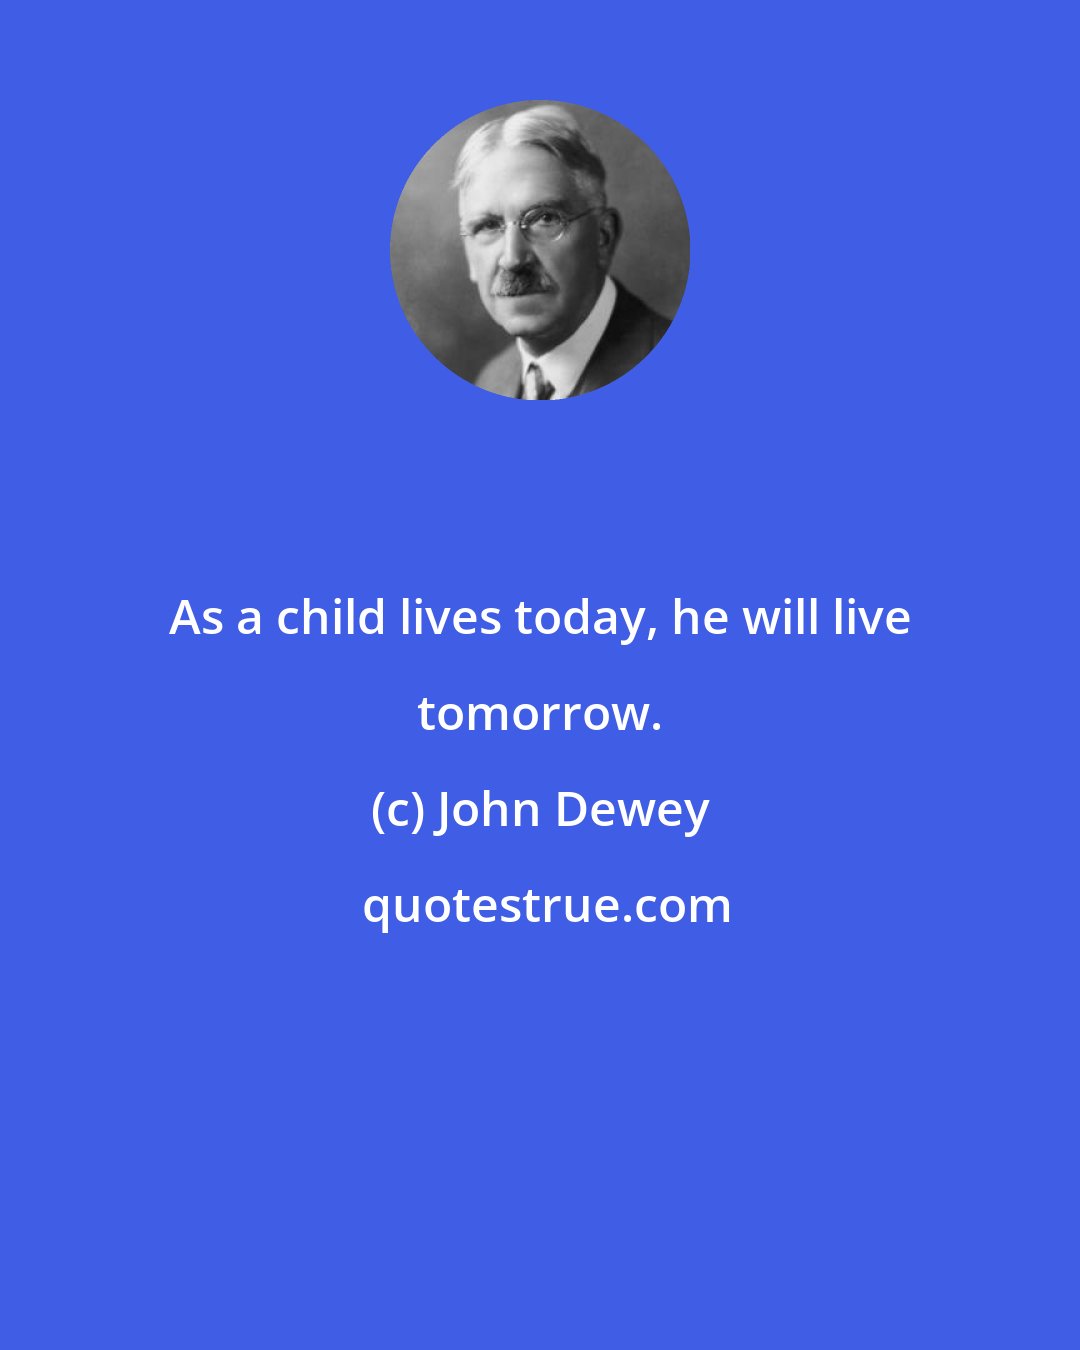 John Dewey: As a child lives today, he will live tomorrow.